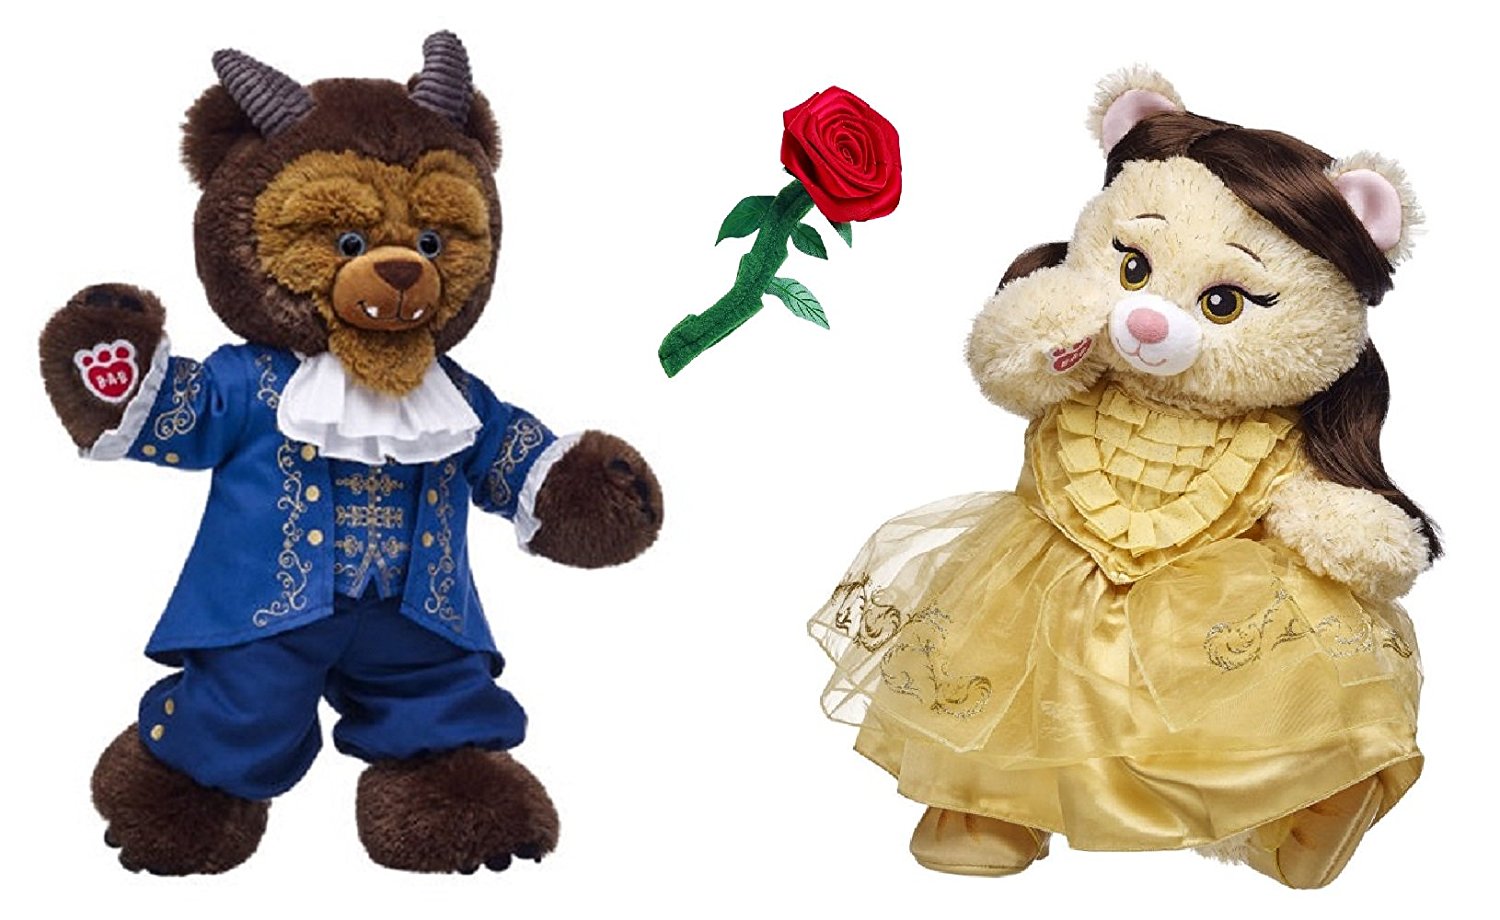 Enchanting Complete Beauty and the Beast Build-A-Bear Set